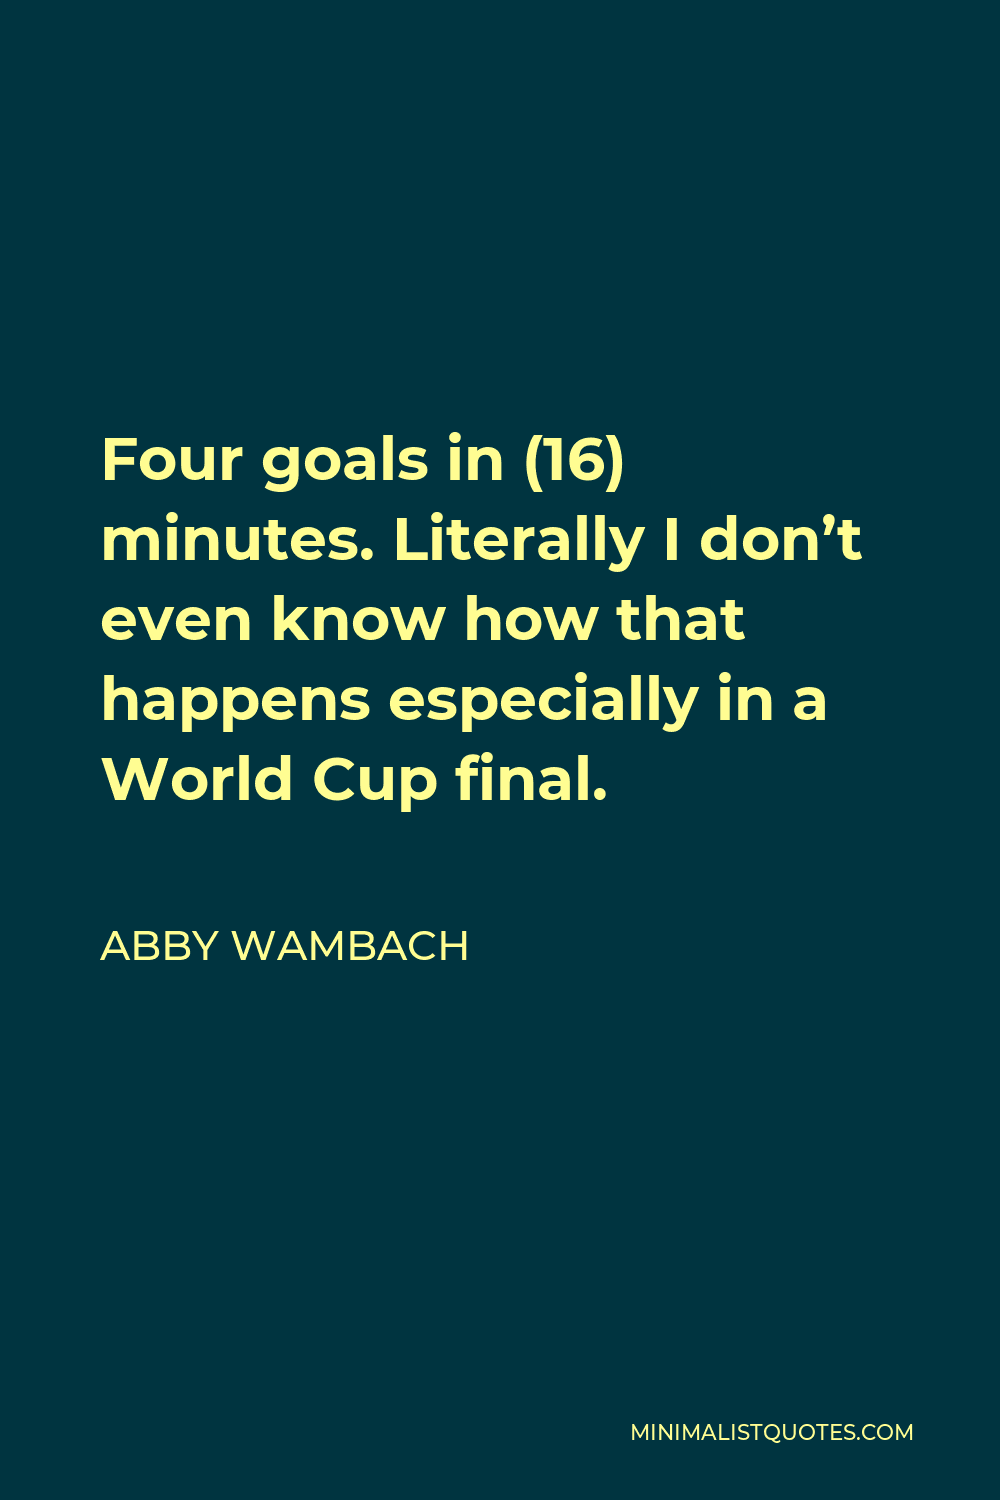 Abby Wambach Quote - Four goals in (16) minutes. Literally I don’t even know how that happens especially in a World Cup final.